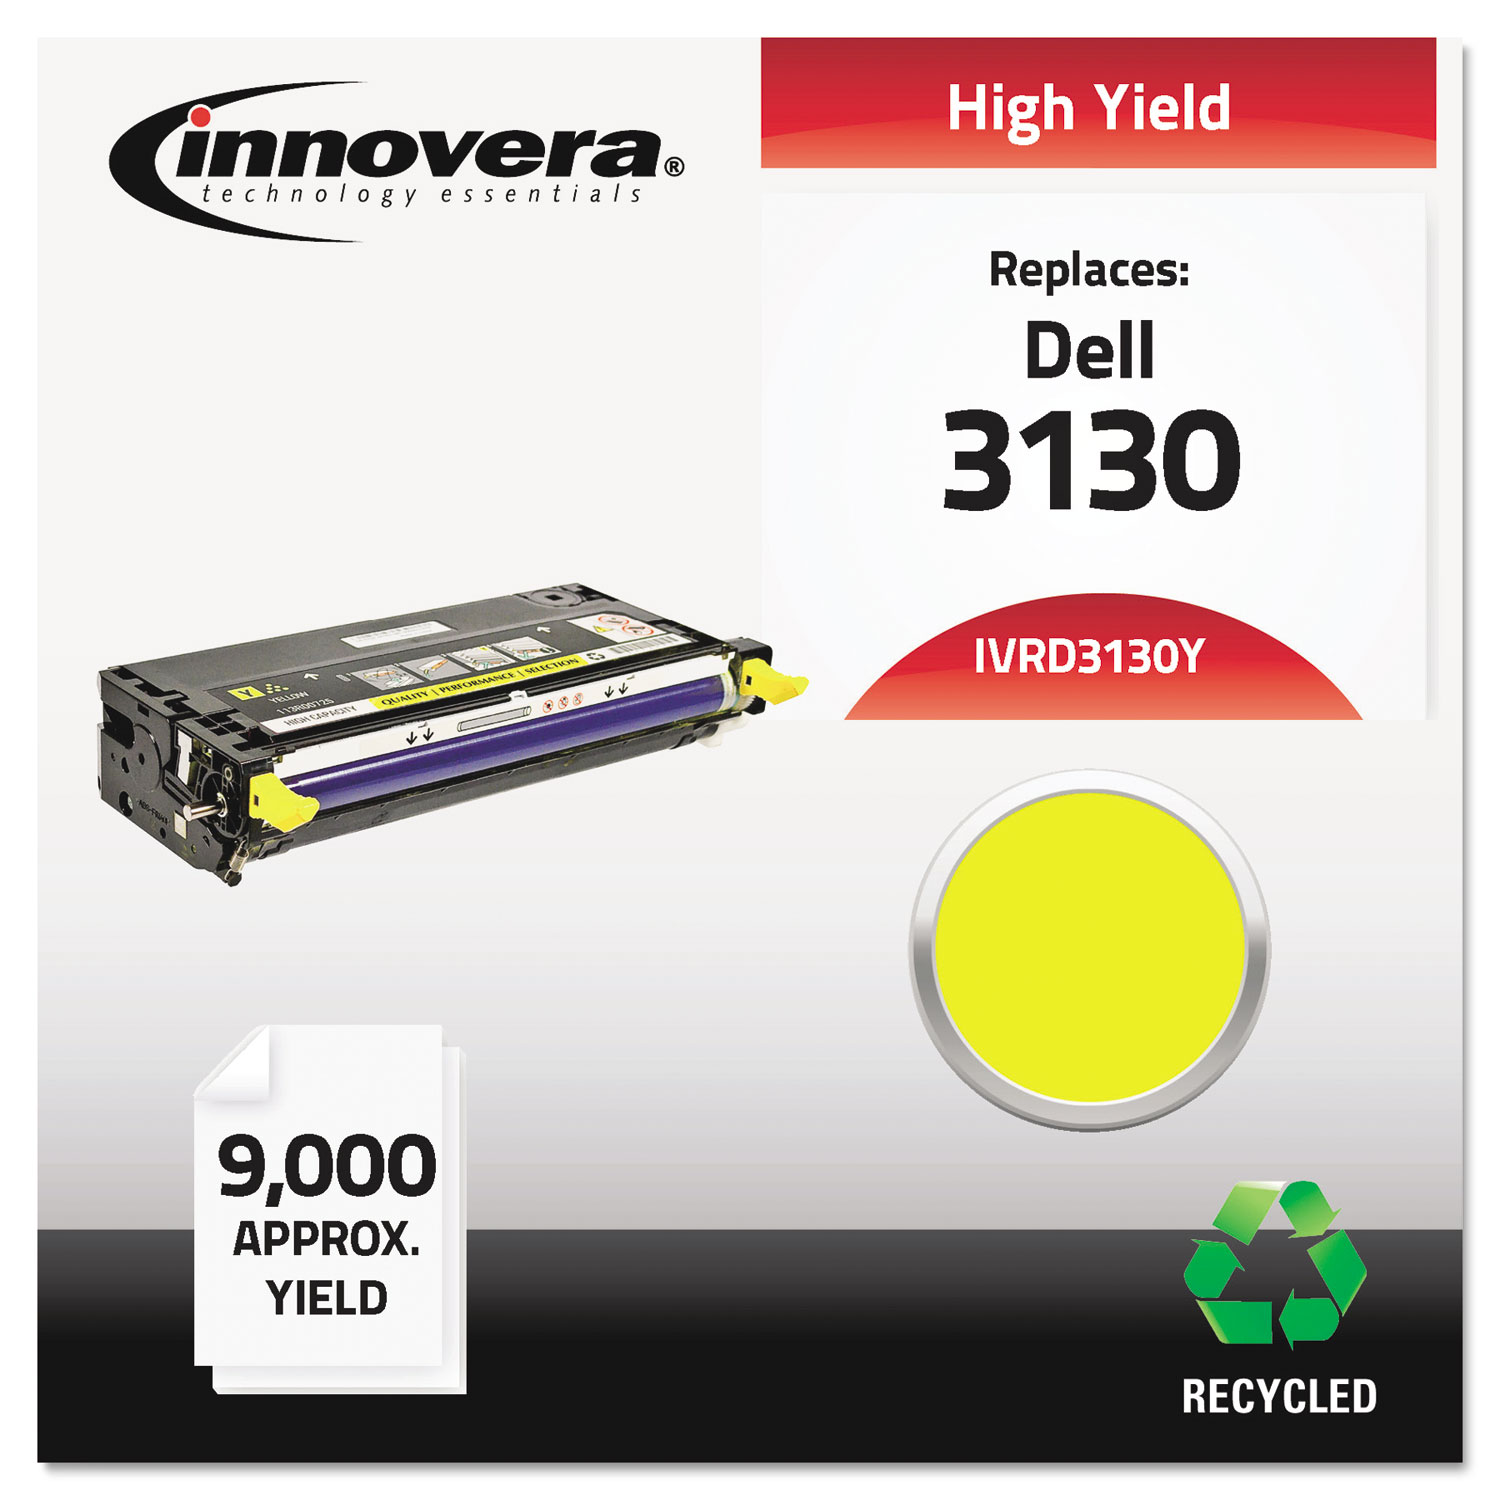 Remanufactured 330-1204 (3130) High-Yield Toner, 9000 Page-Yield, Yellow